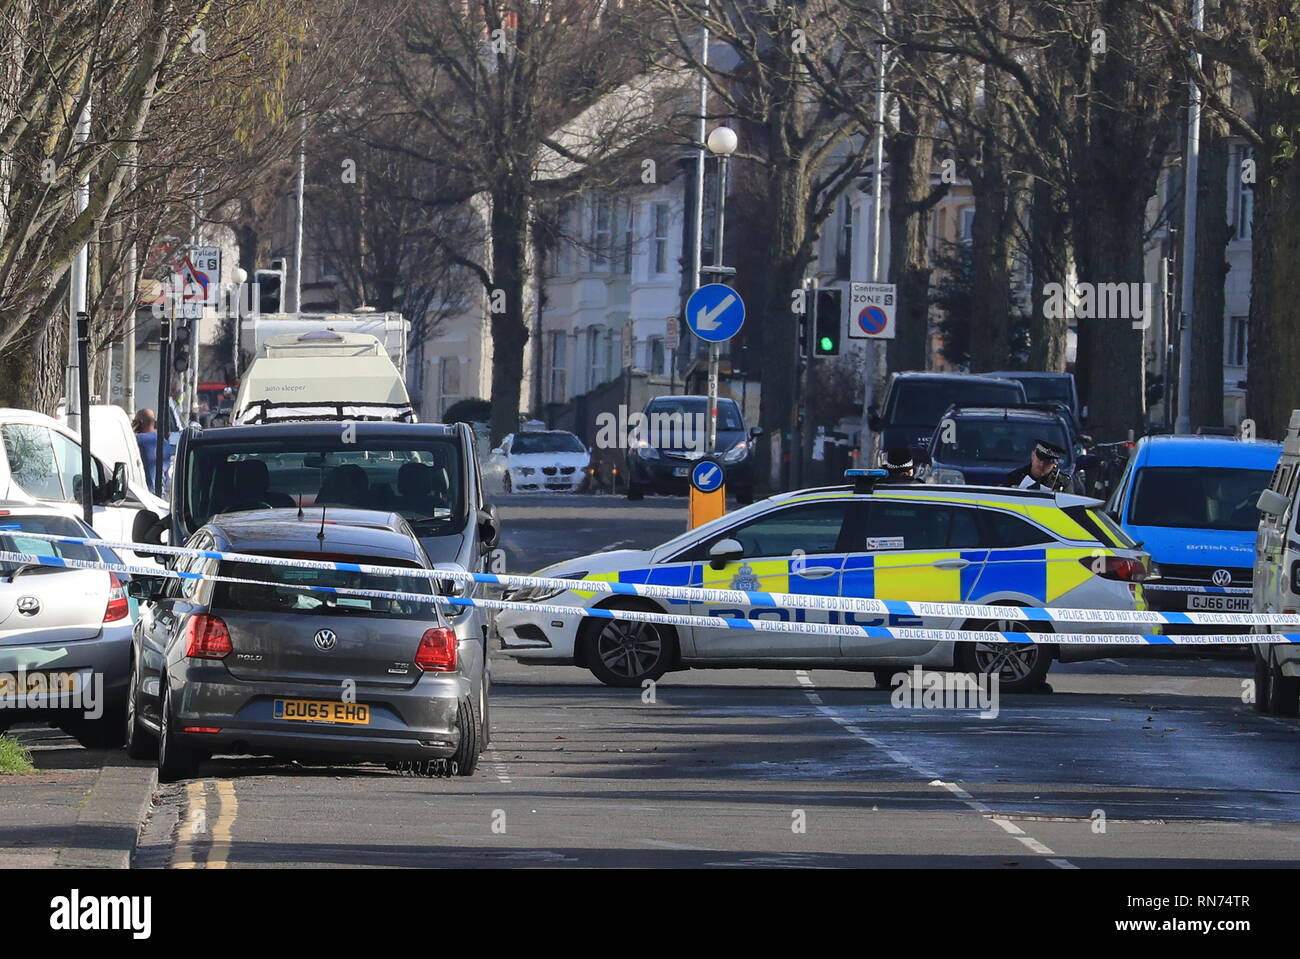 Police tape surrounds a silver Volkswagen Polo (left) where Abdul Deghayes was found injured in the passenger seat, near St Joseph's Church in Brighton. The brother of two British teenagers killed fighting for Islamists in Syria has died in hospital after being stabbed in a car after it crashed in the city, police said. Stock Photo